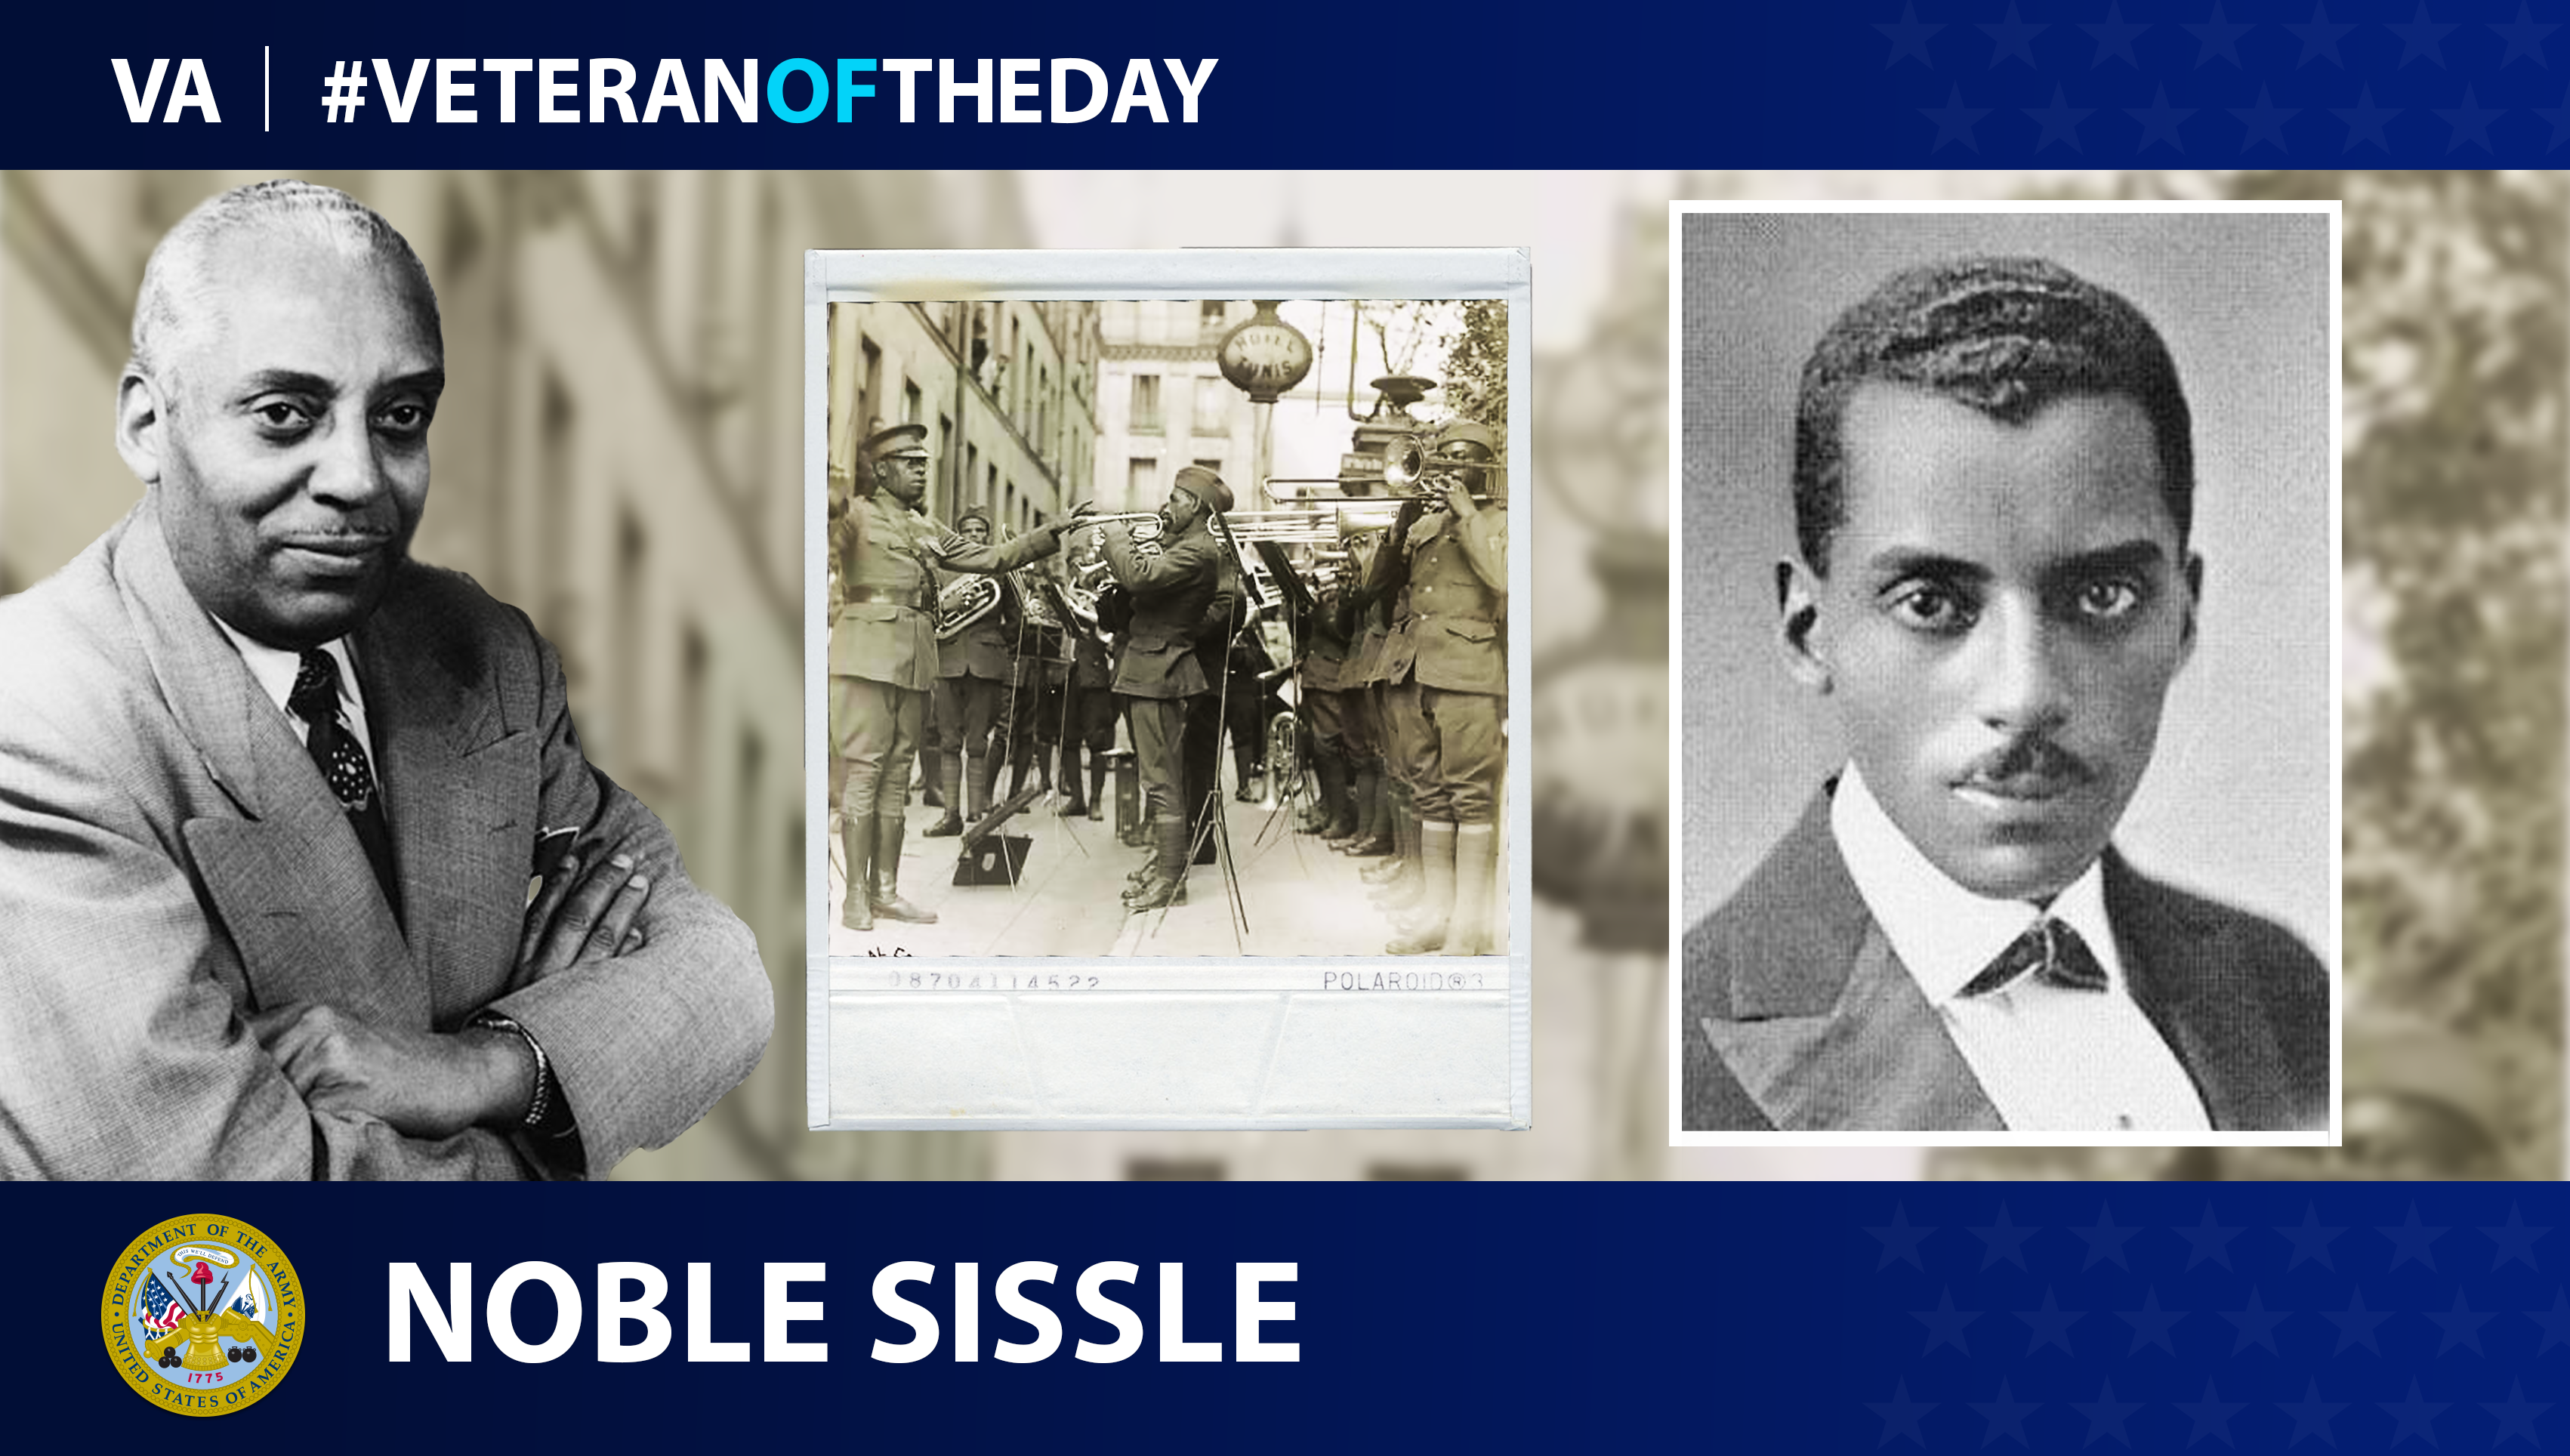 Army Veteran Noble Sissle is today’s Veteran of the Day.